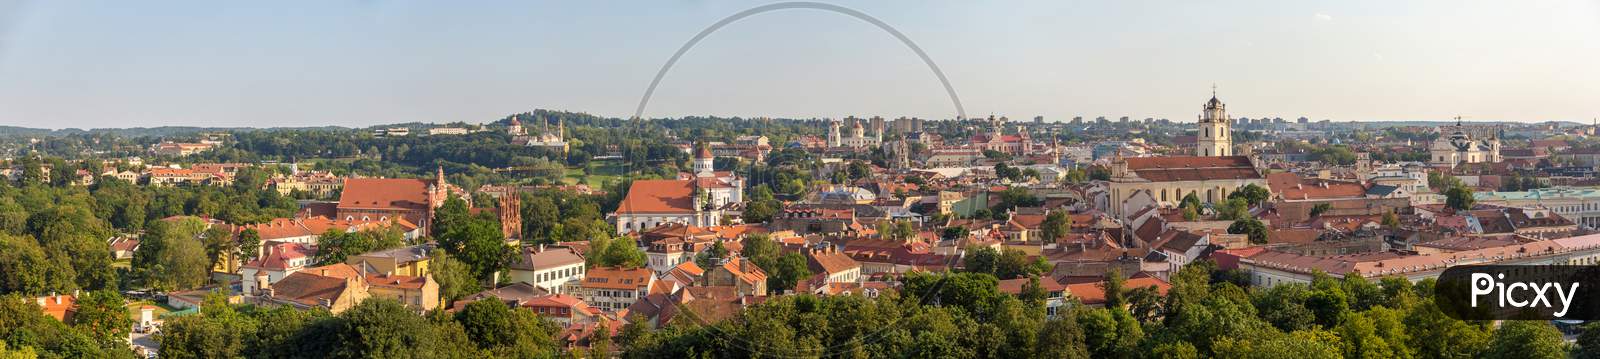 Panorama Of The City Center Of Vilnius, Lithuania